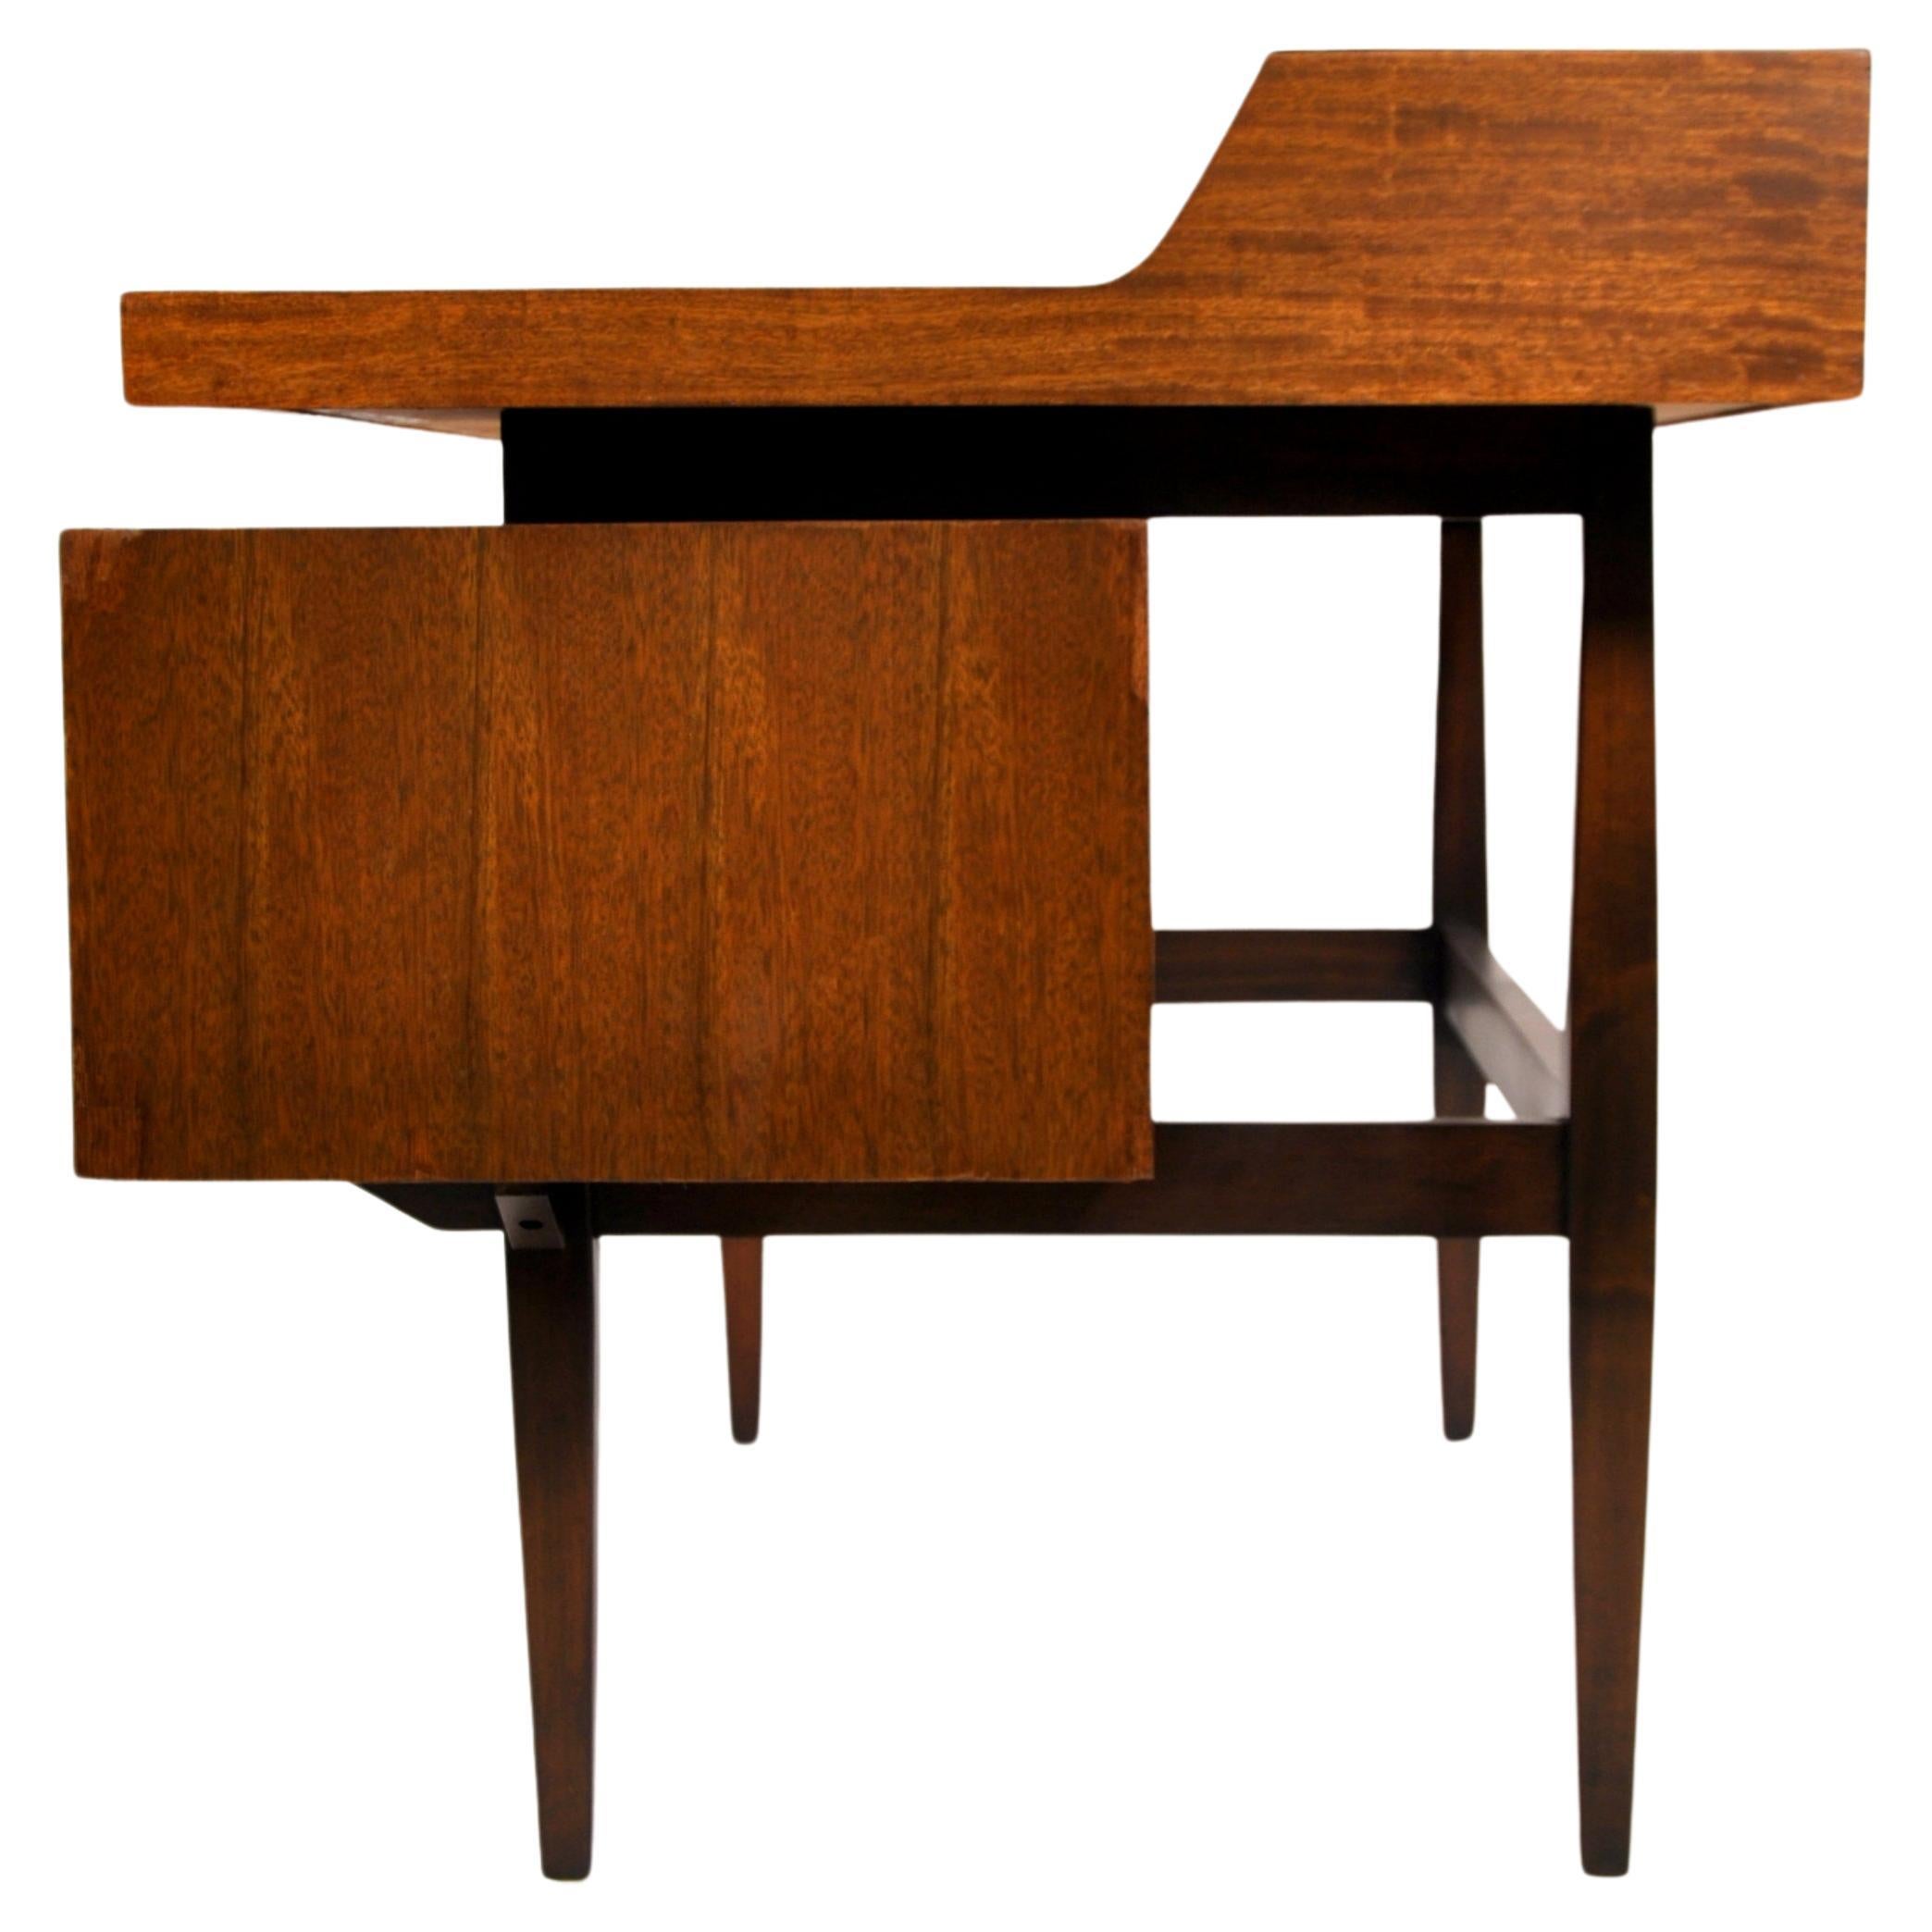 Milo Baughman for Drexel Perspective Mindoro and Leather Desk 6